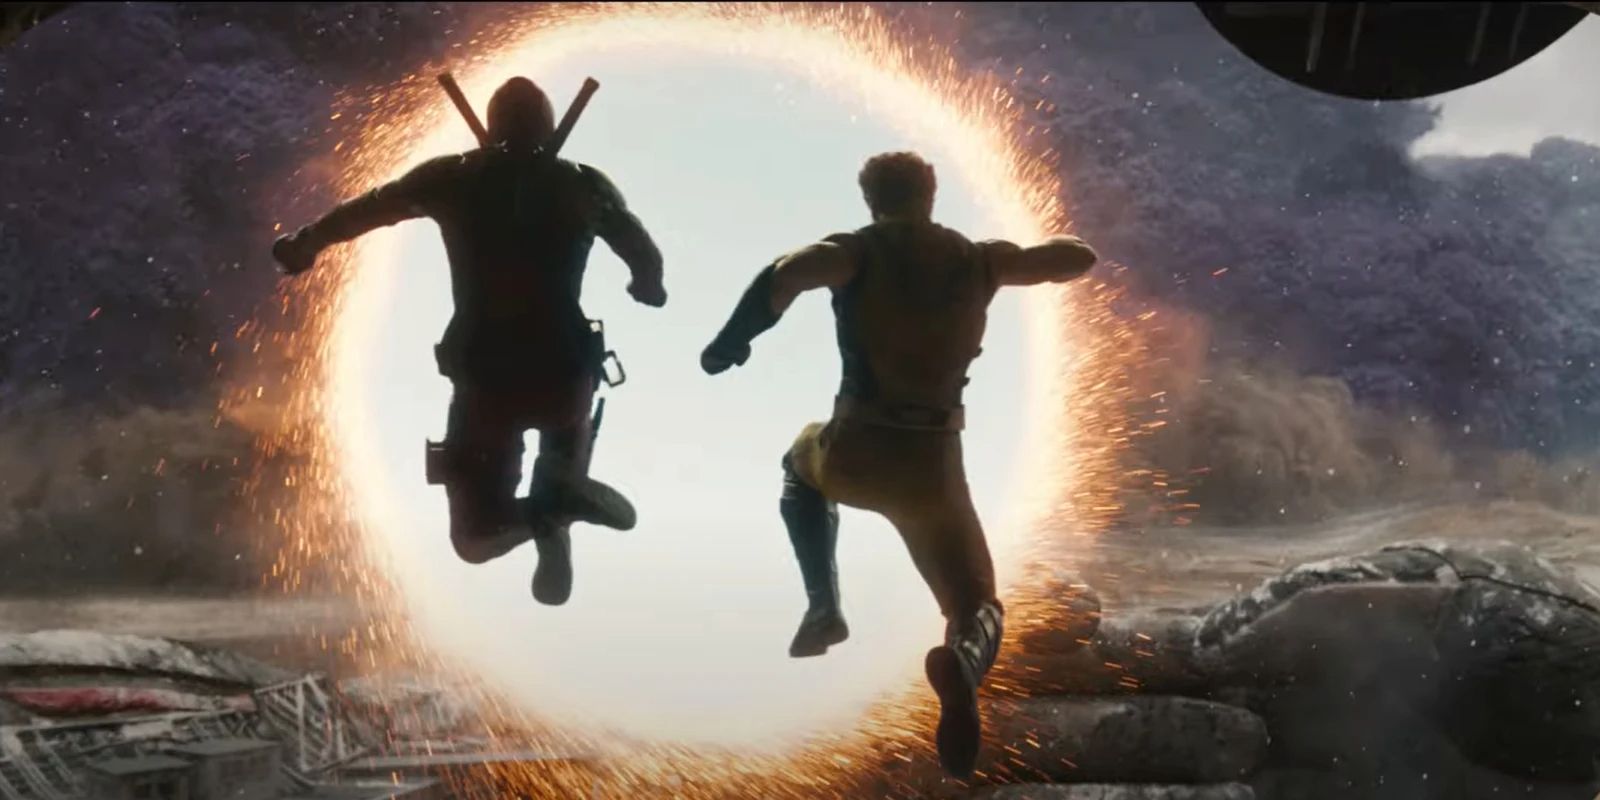 Deadpool & Wolverine Trailer Beats Entire MCU Combined With New Record